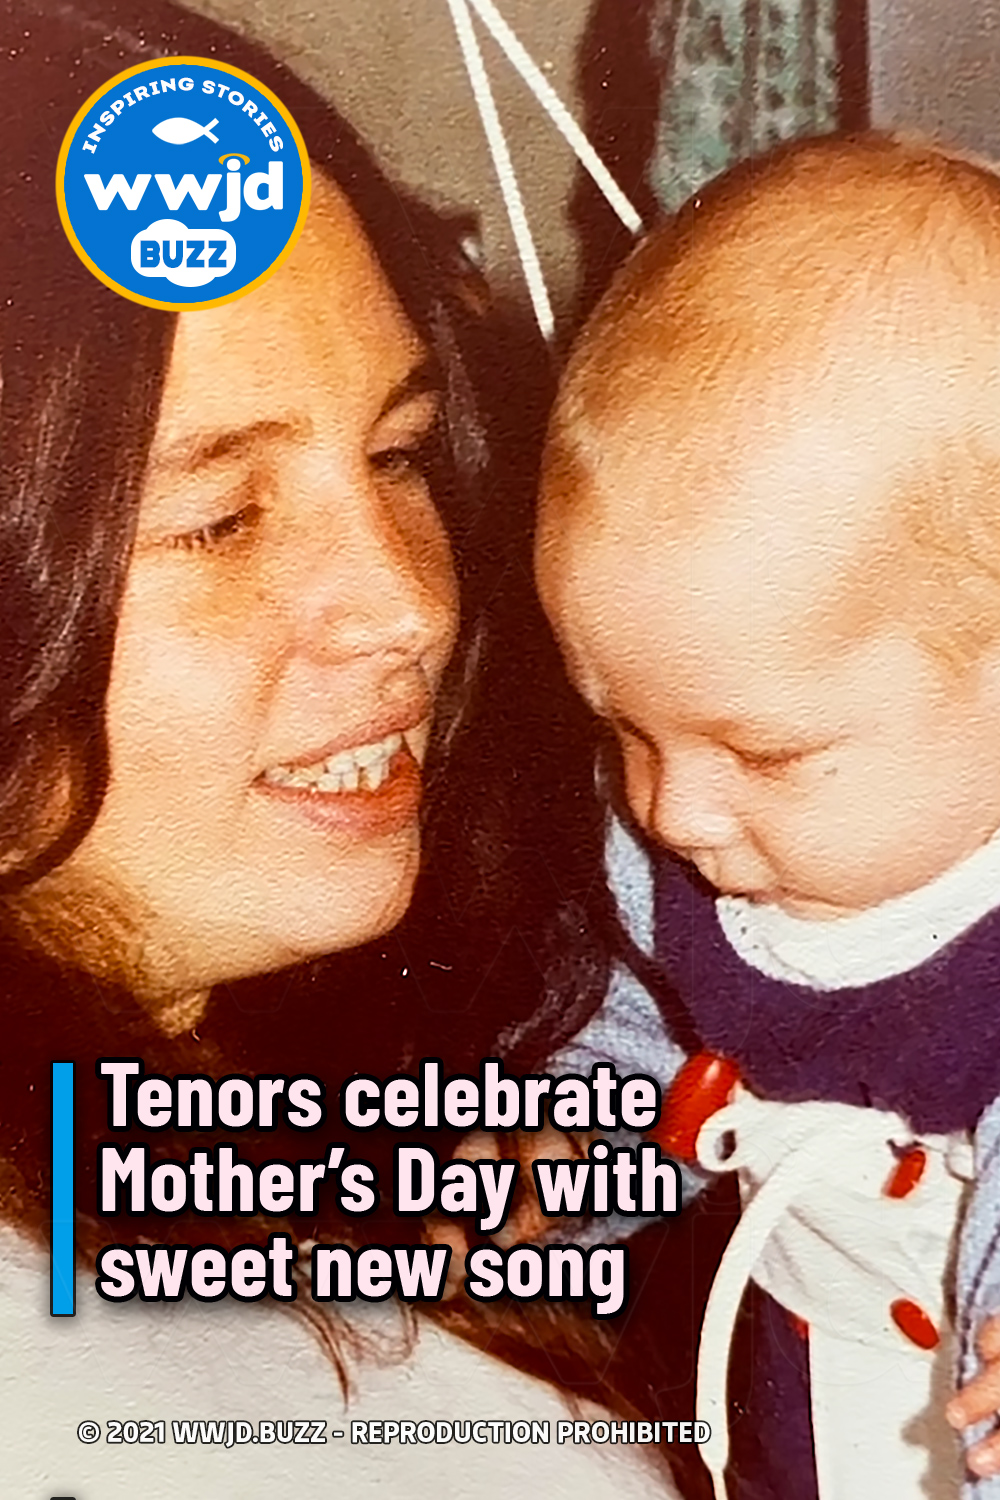 Tenors celebrate Mother’s Day with sweet new song